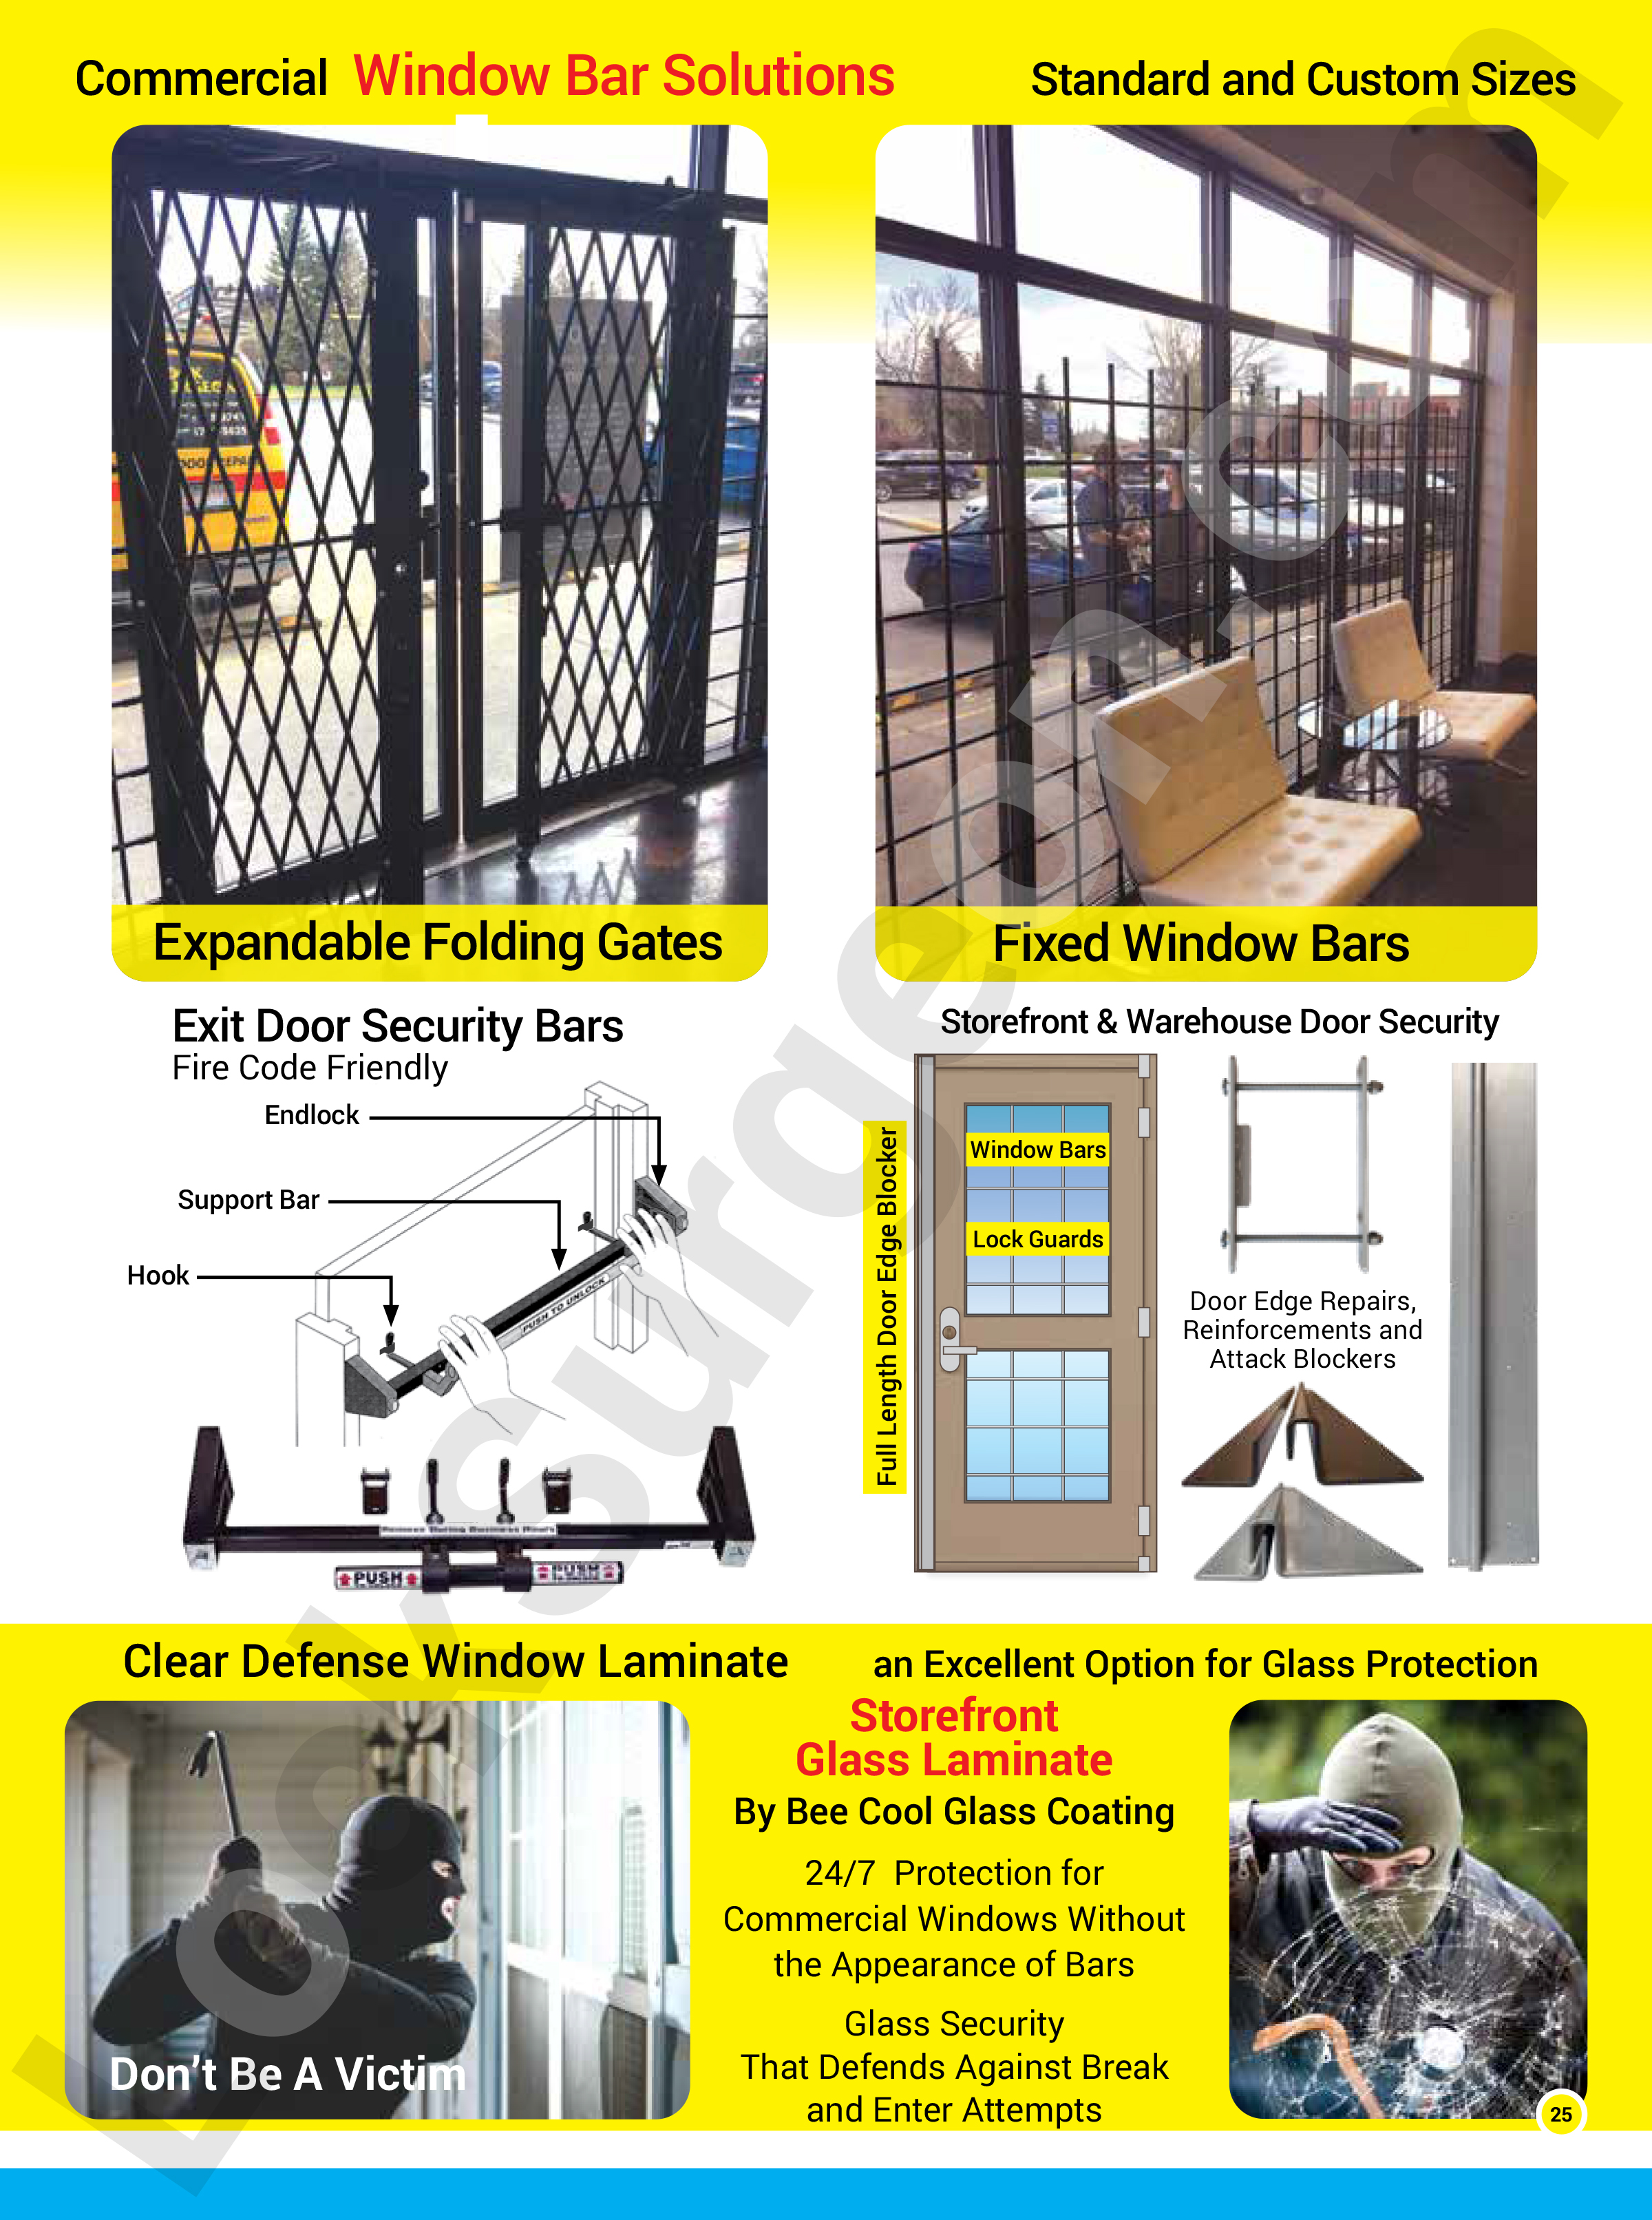 Commercial window bar solutions in standard and custom sizes. Storefront & warehouse door security with expandable folding gates, fixed window bars, exit door security bars. Door edge repairs and reinforcements and attack blockers to deter break and enters. Fire code friendly solutions.